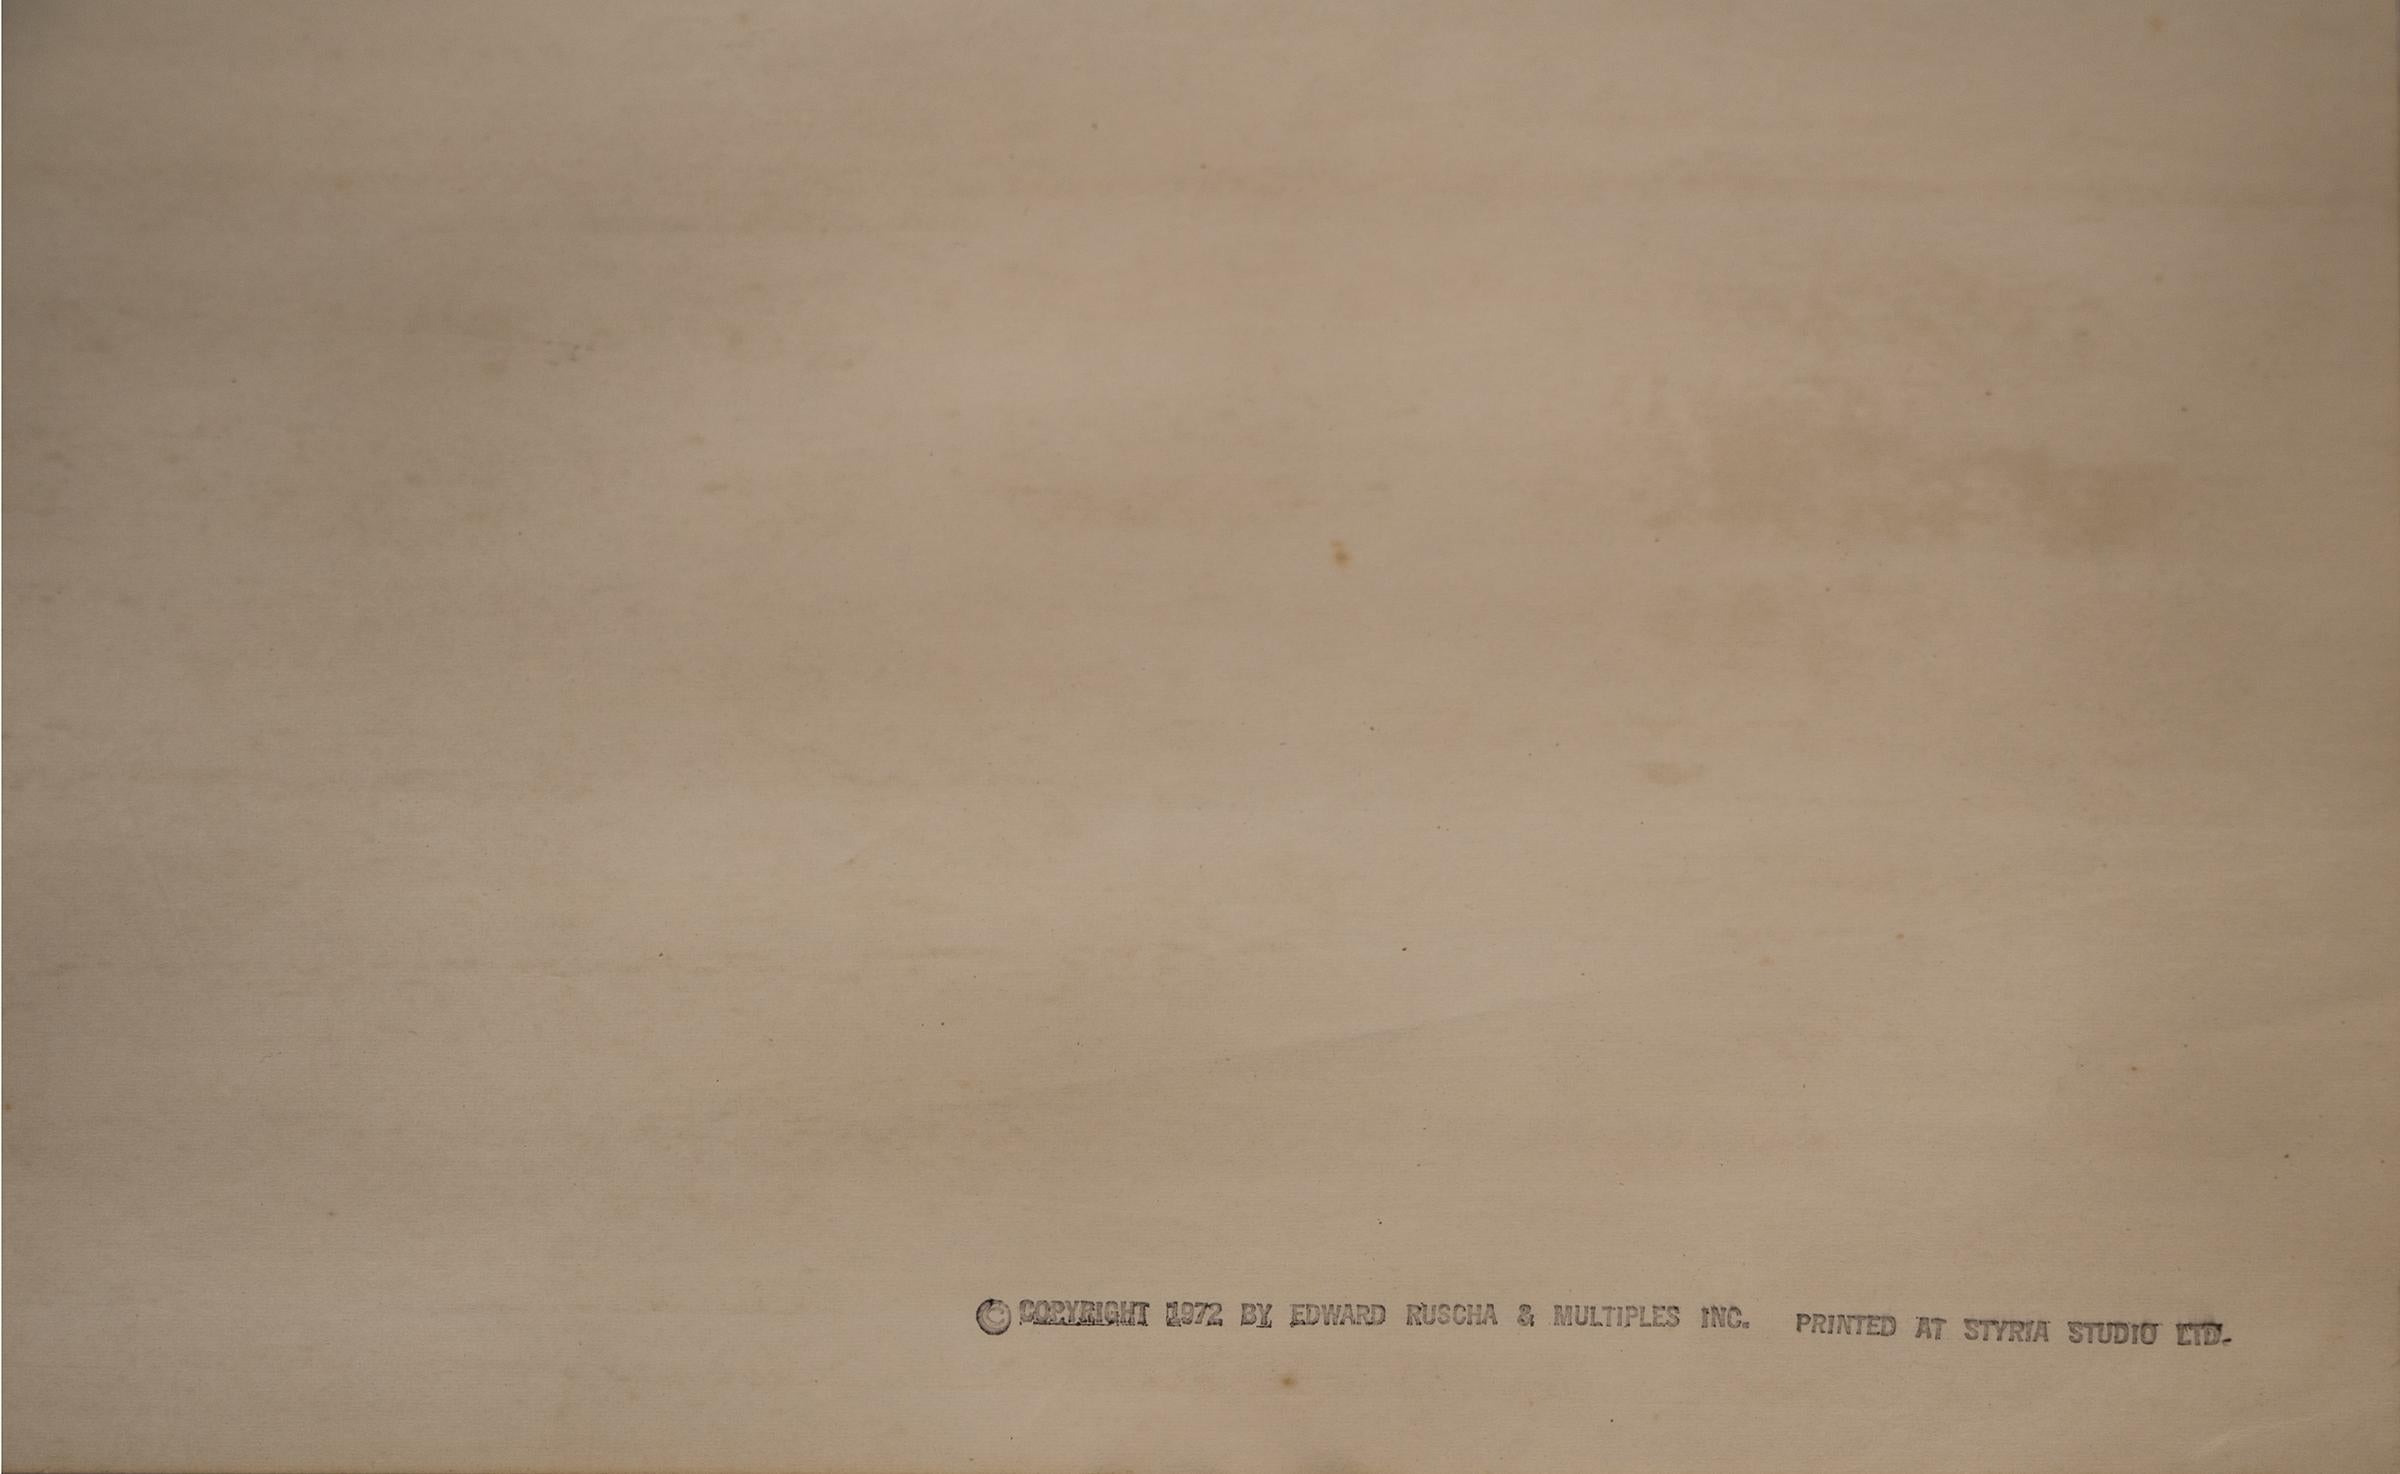 Cockroaches by Edward Ruscha from the artist's Insect Portfolio, 1972.  A screenprint in 4 colors printed on paper-backed wood veneer.  Signed, dated and editioned 100/100 lower left.   On verso: 